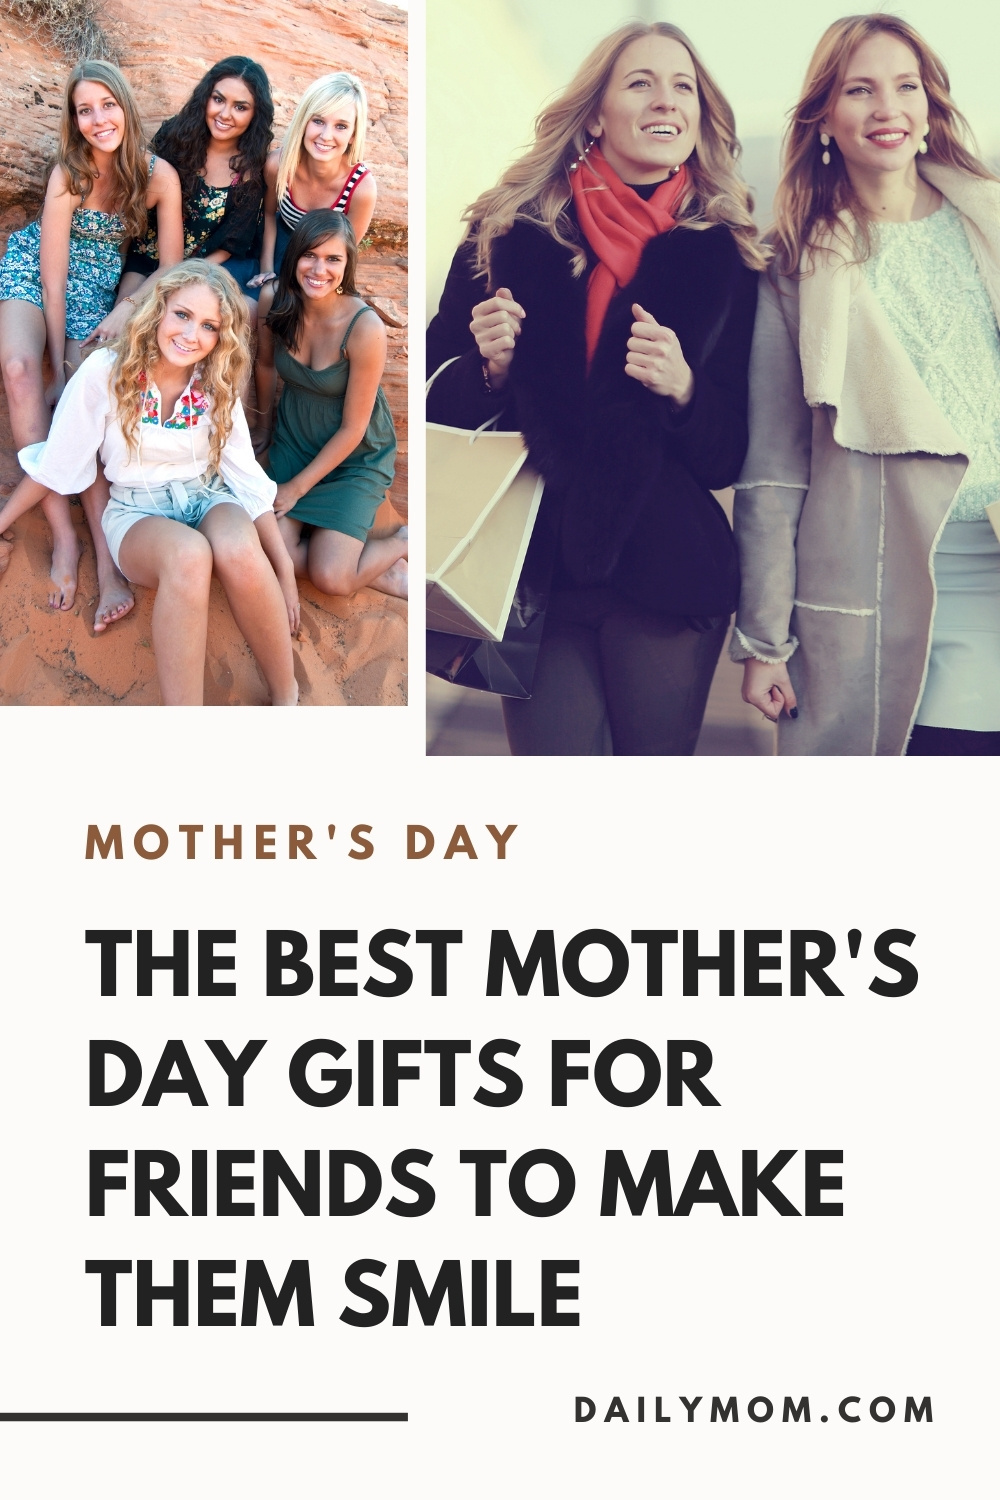 14 Of The Best Mother’s Day Gifts For Friends To Make Them Smile